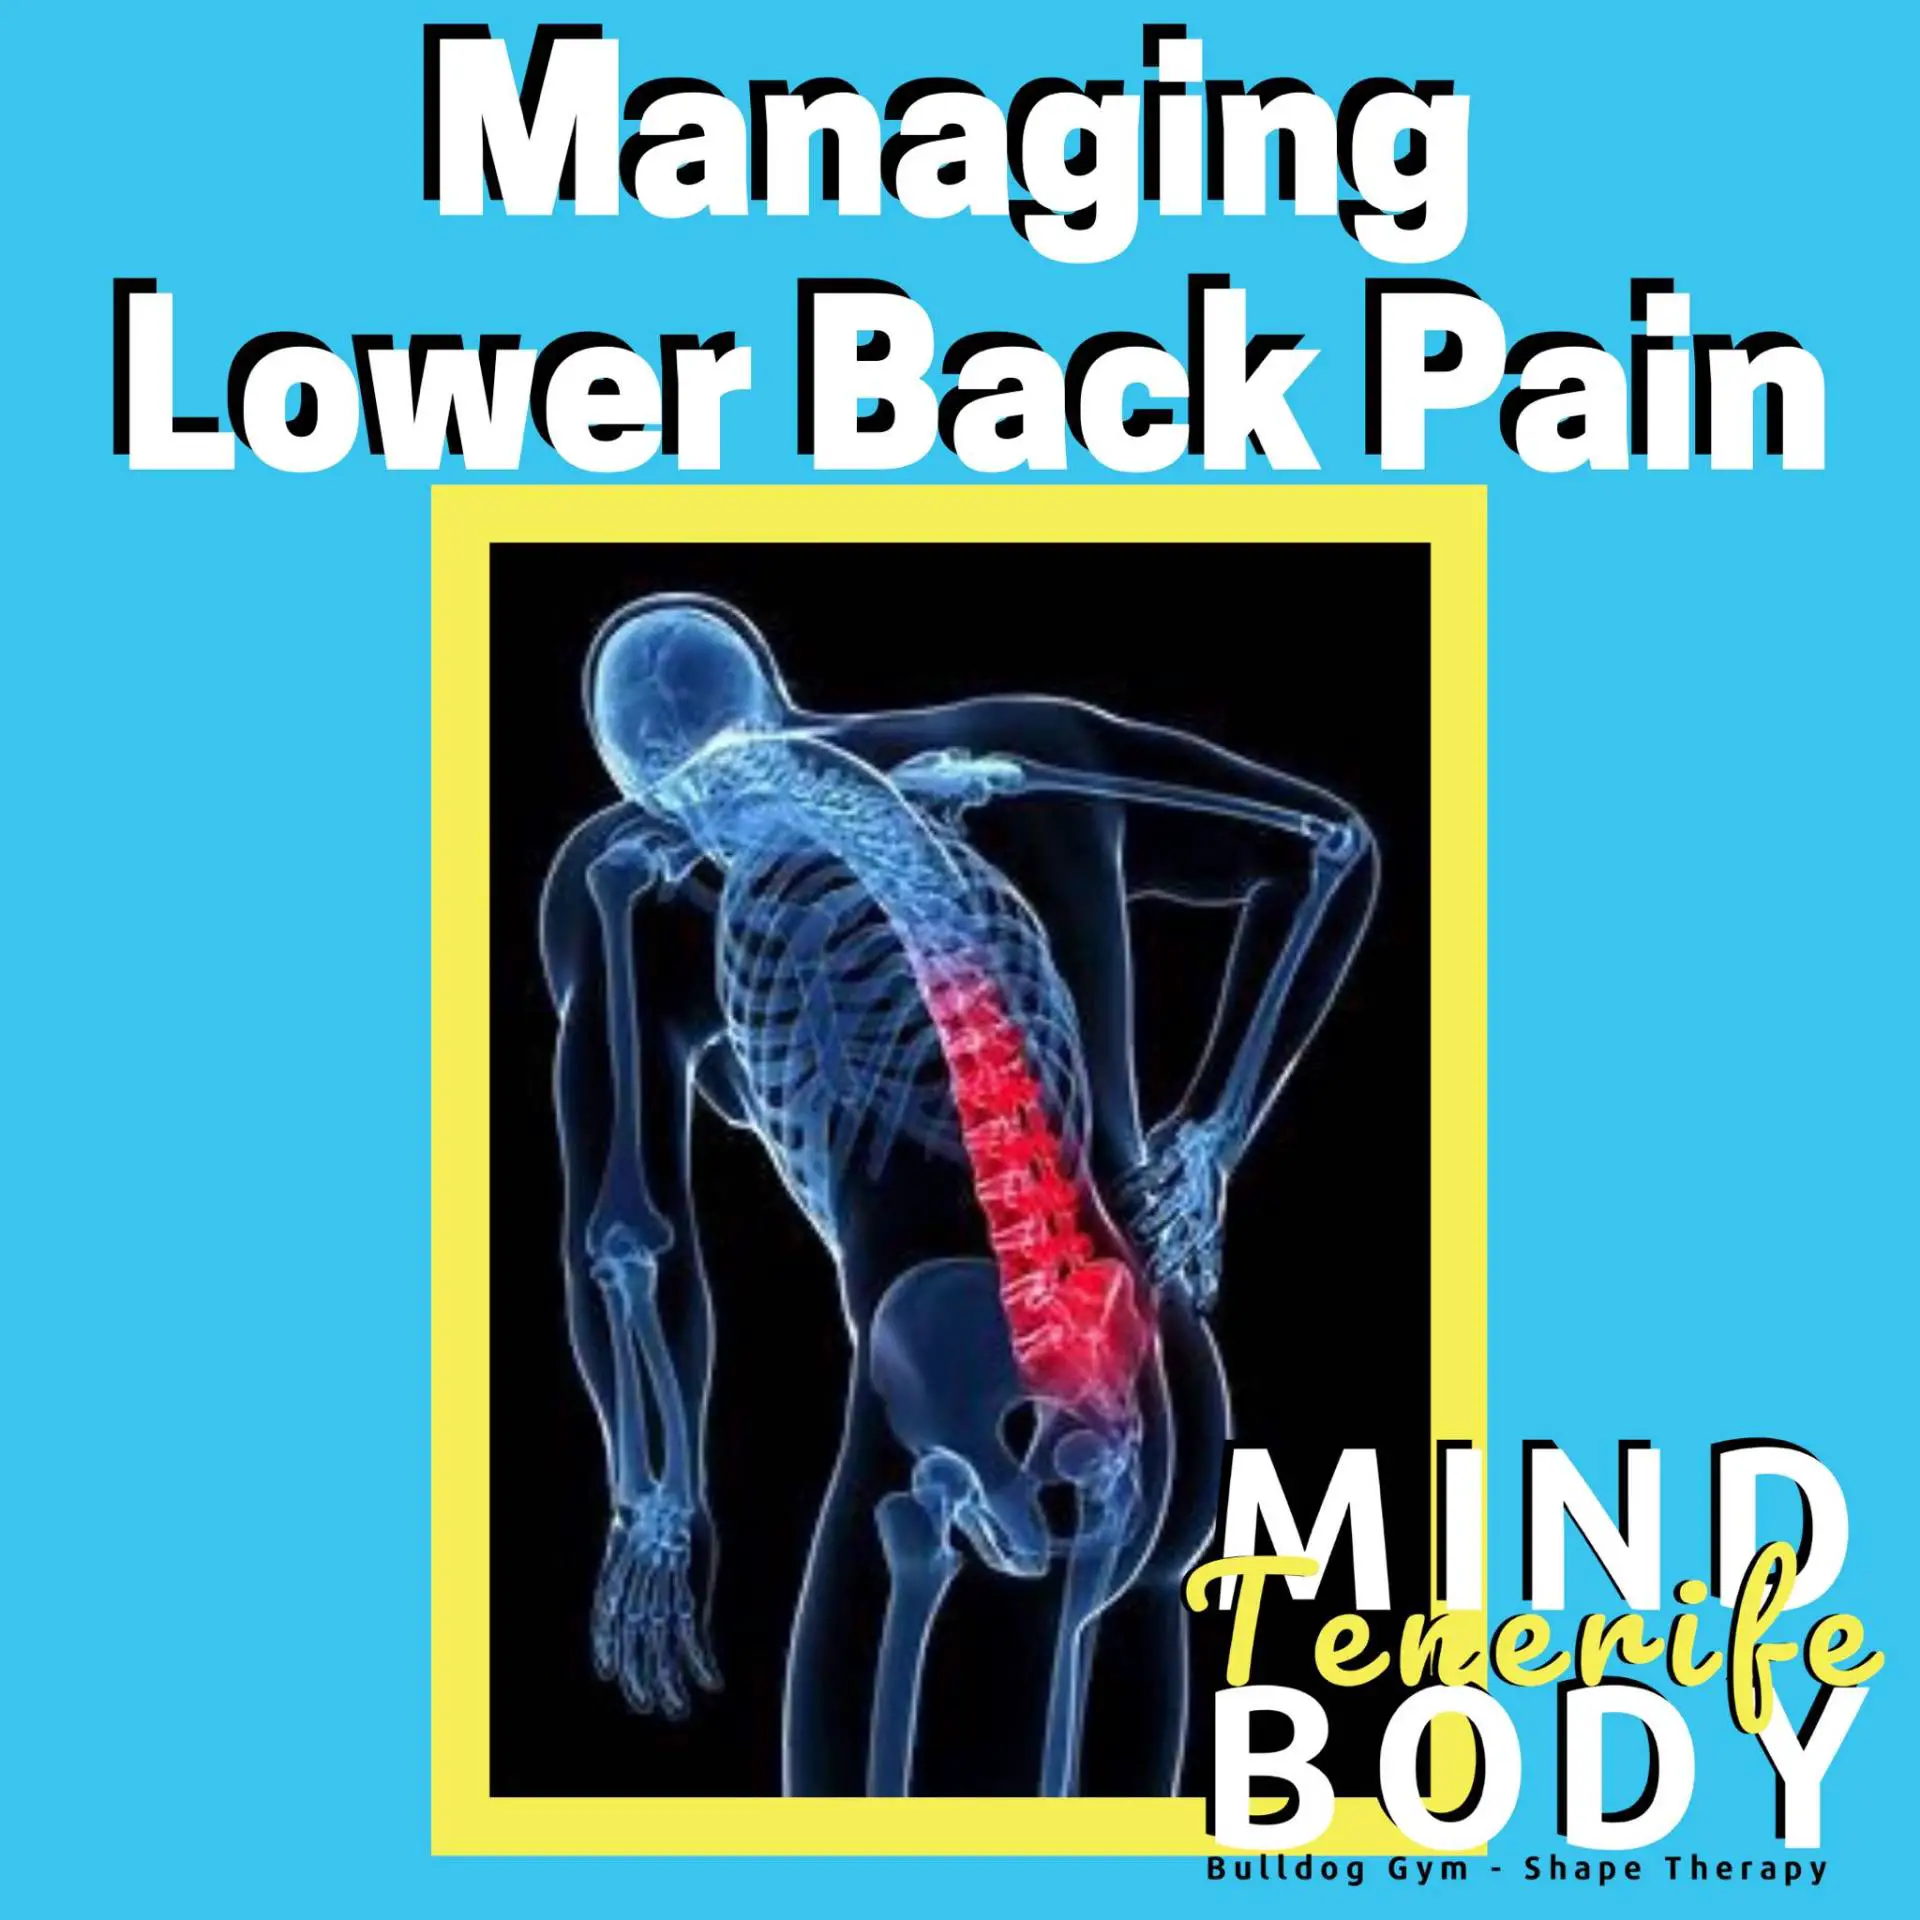 What Lower Back Pain Means